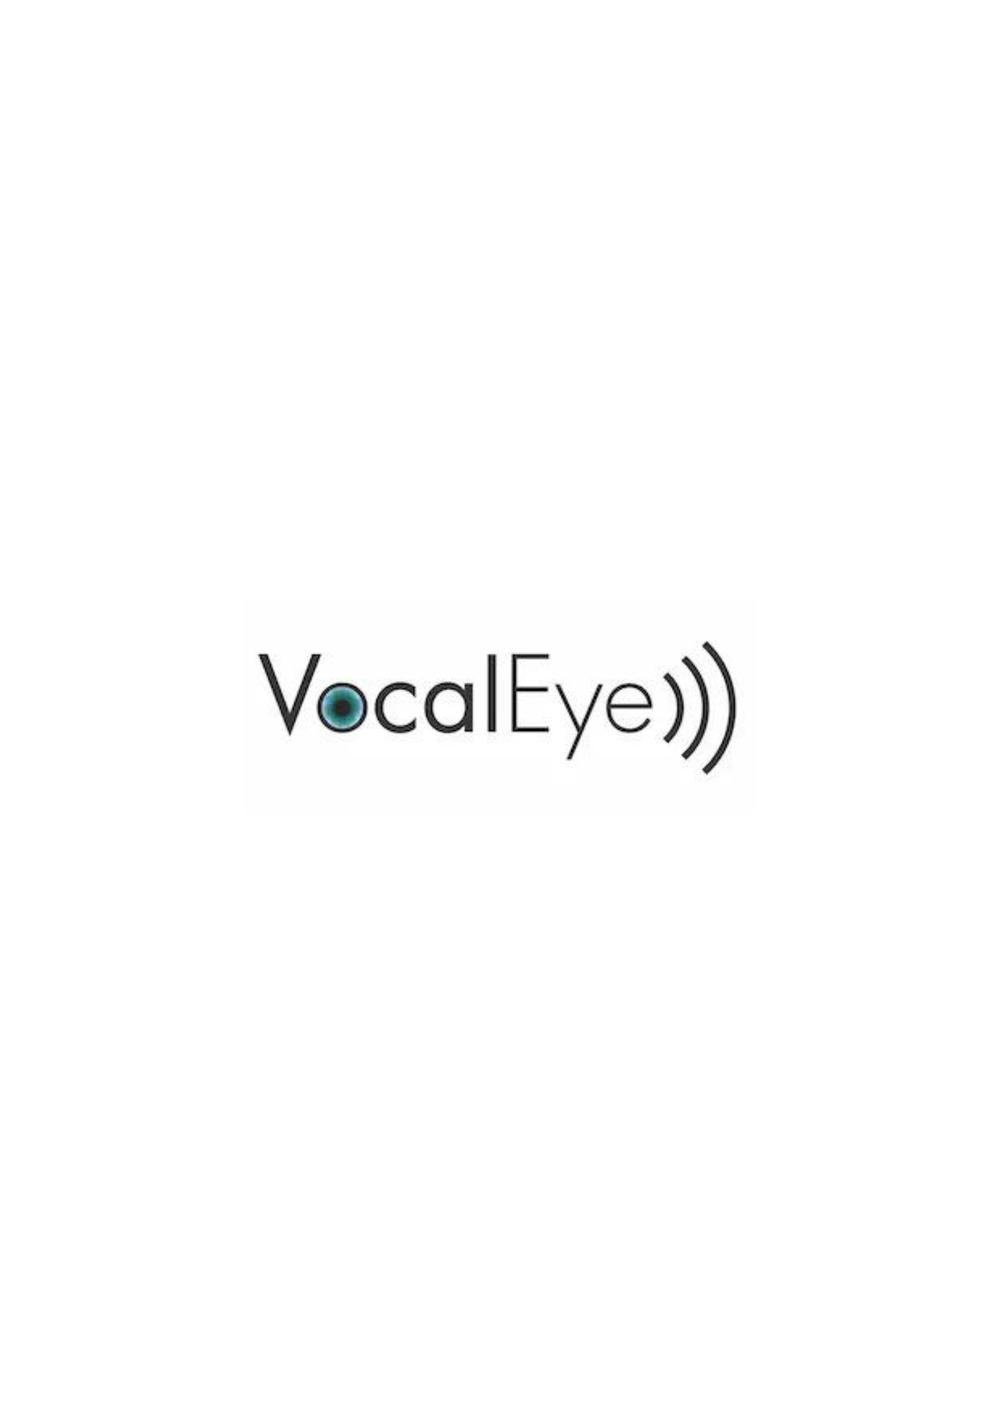 VocalEye (Vancouver, BC) post image